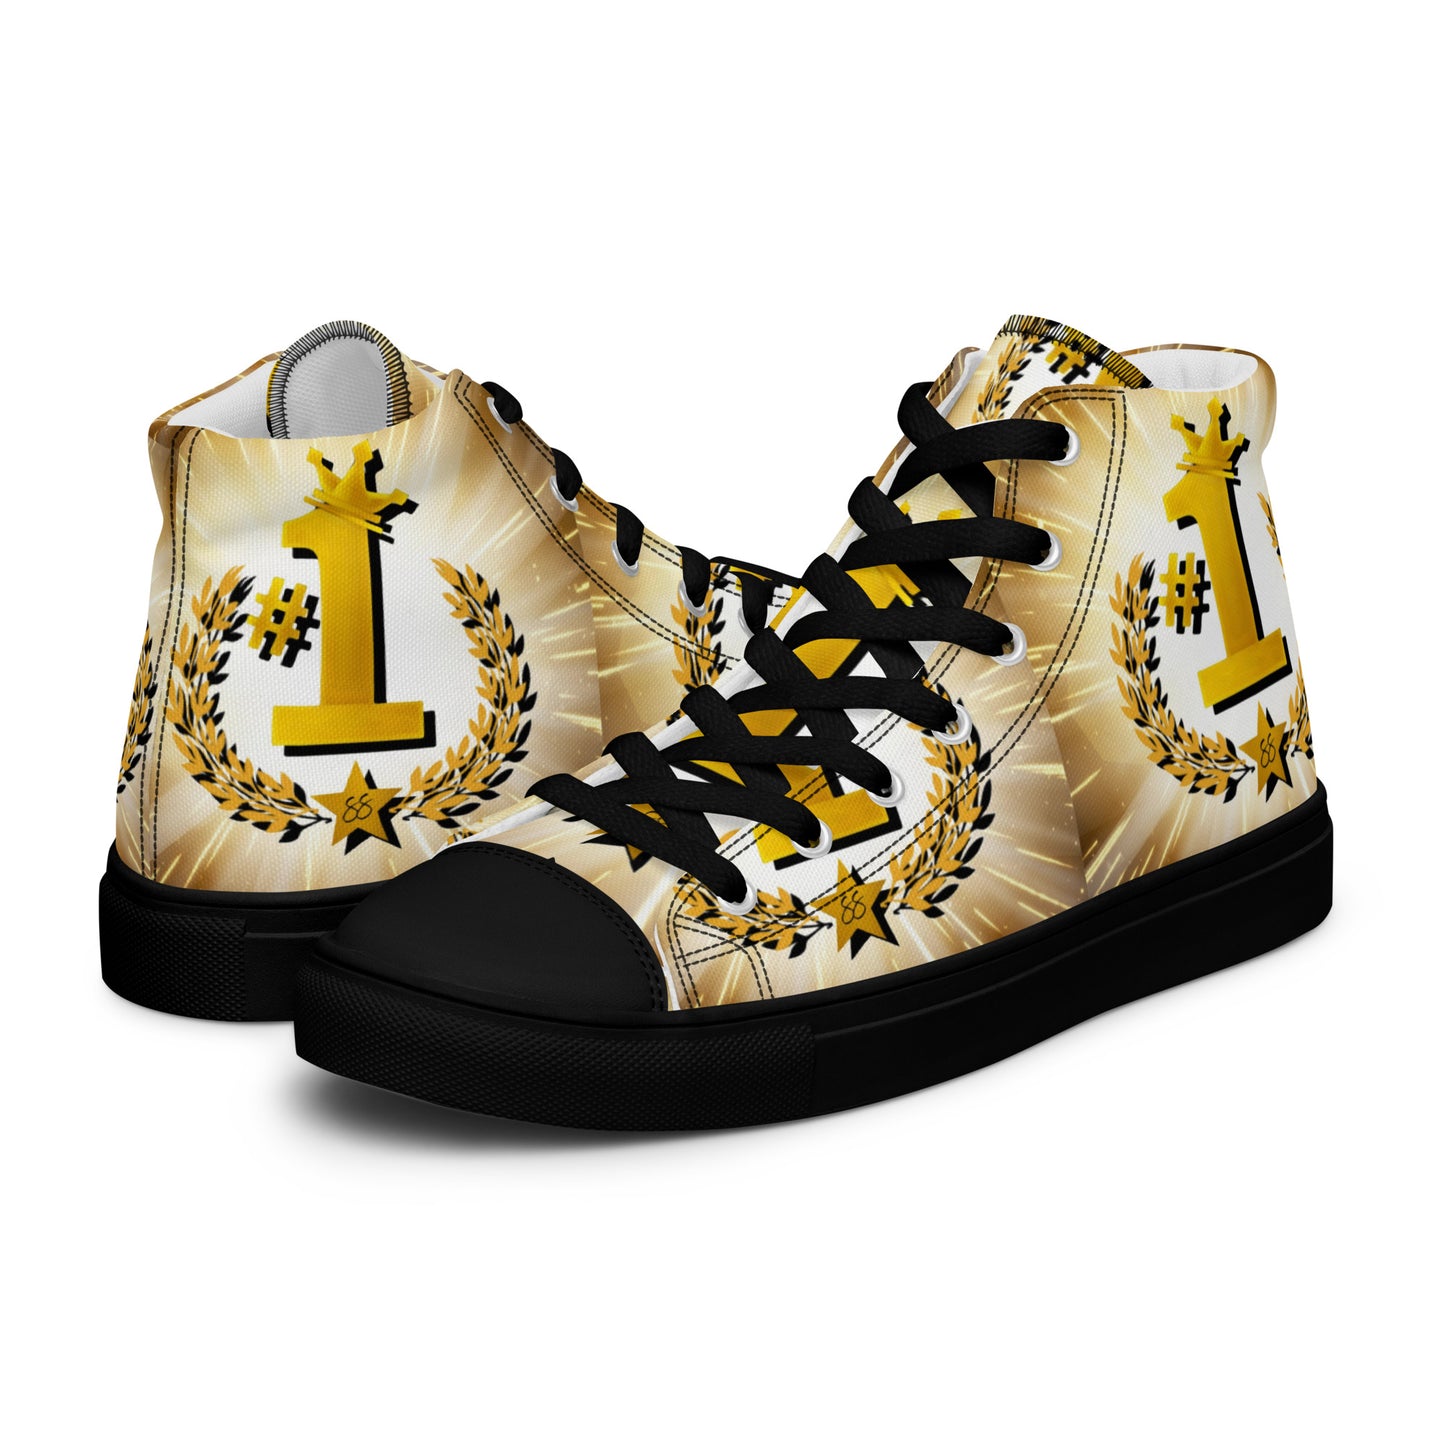 Sidow Sobrino's No.1 Men’s high top canvas shoes